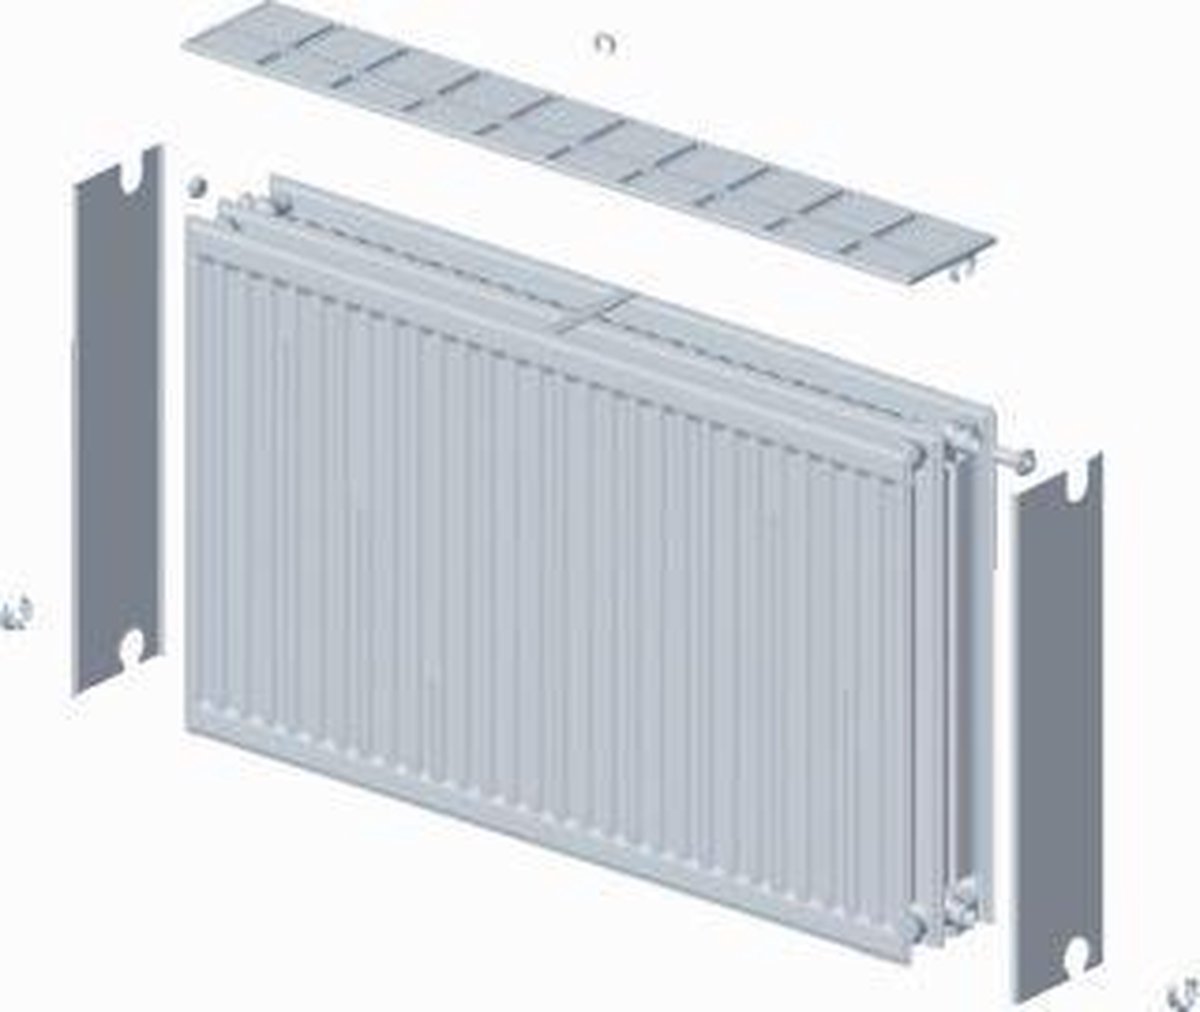 Stelrad paneelradiator Novello, staal, wit, (hxlxd) 700x1200x158mm, 33